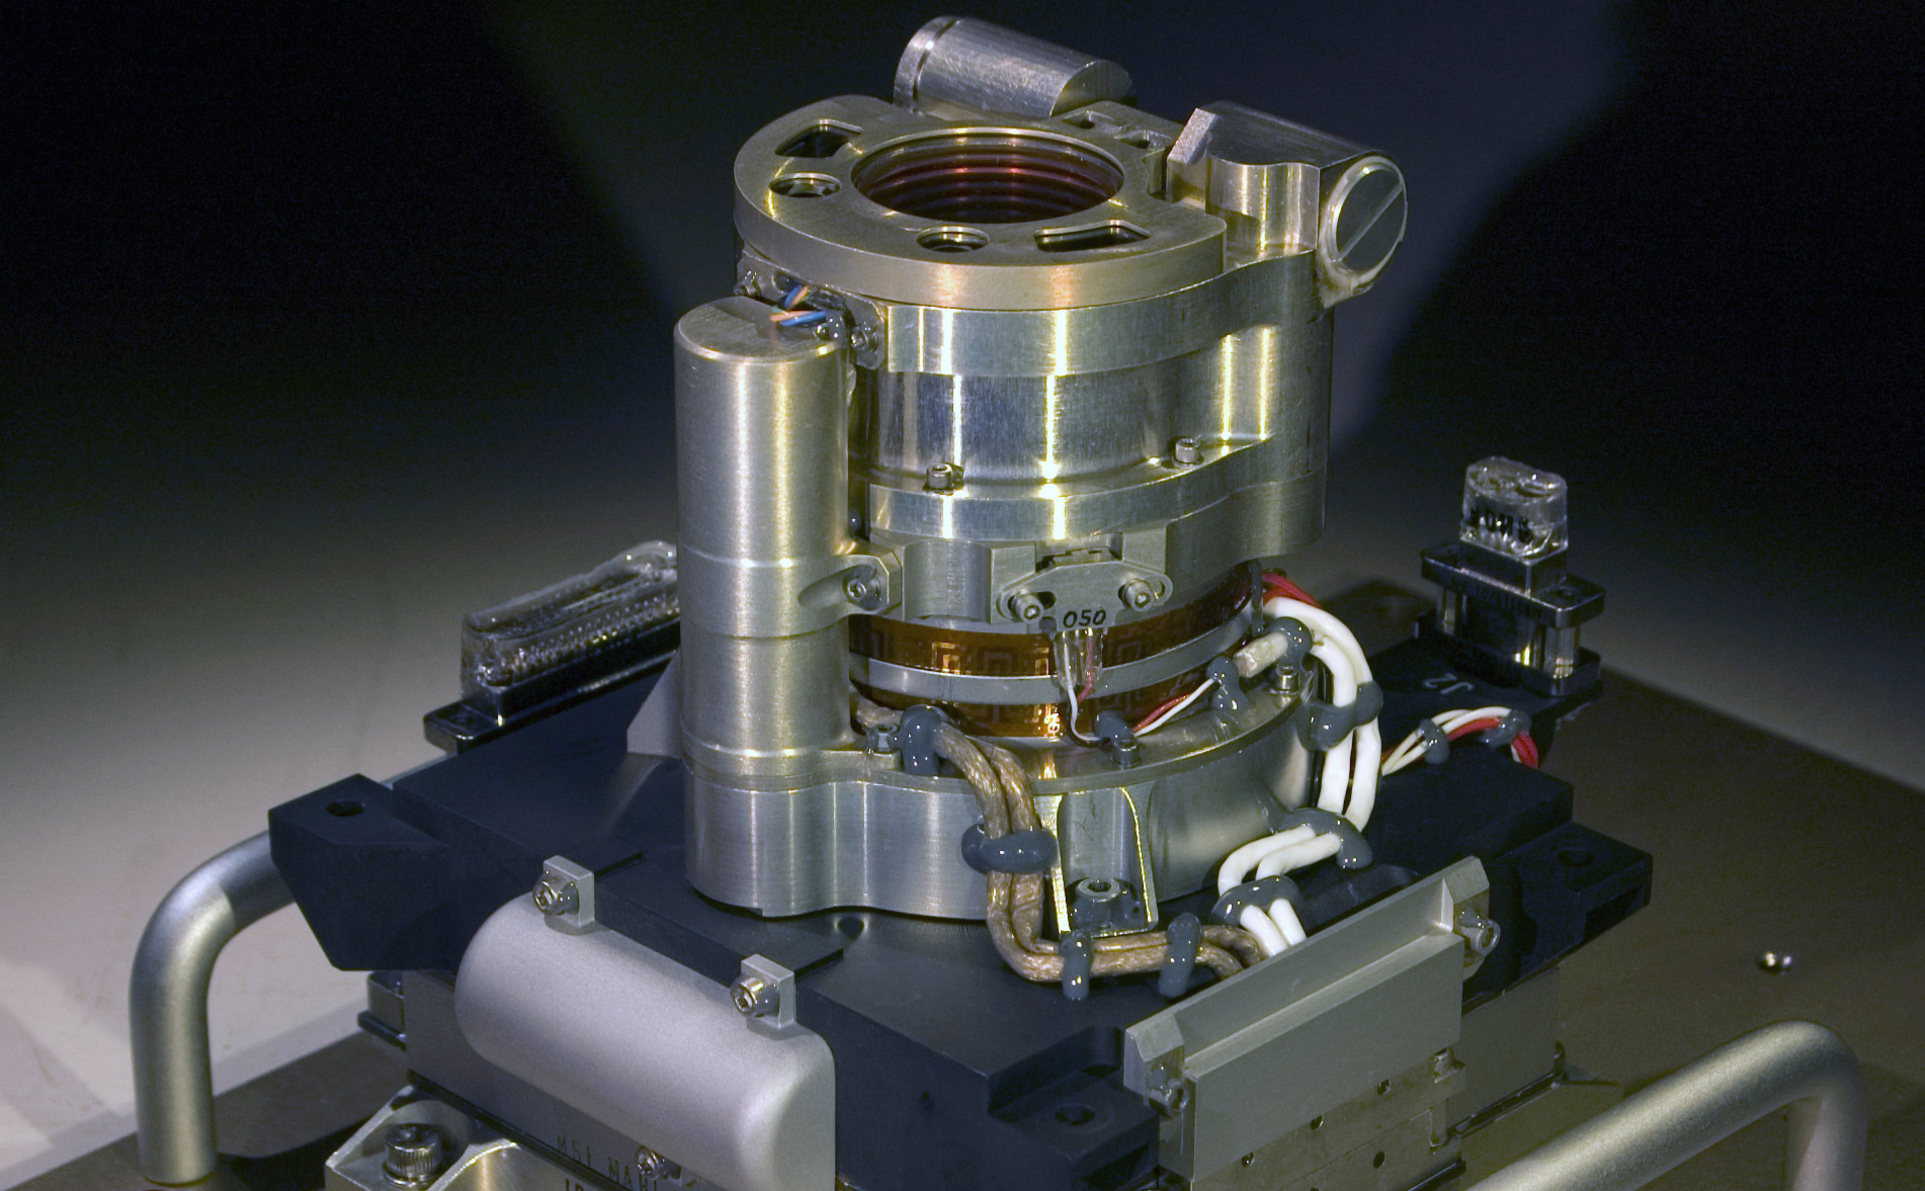 The Mars Hand Lens Imager (MAHLI) camera will fly on NASA's Mars Science Laboratory mission, launching in late 2011.